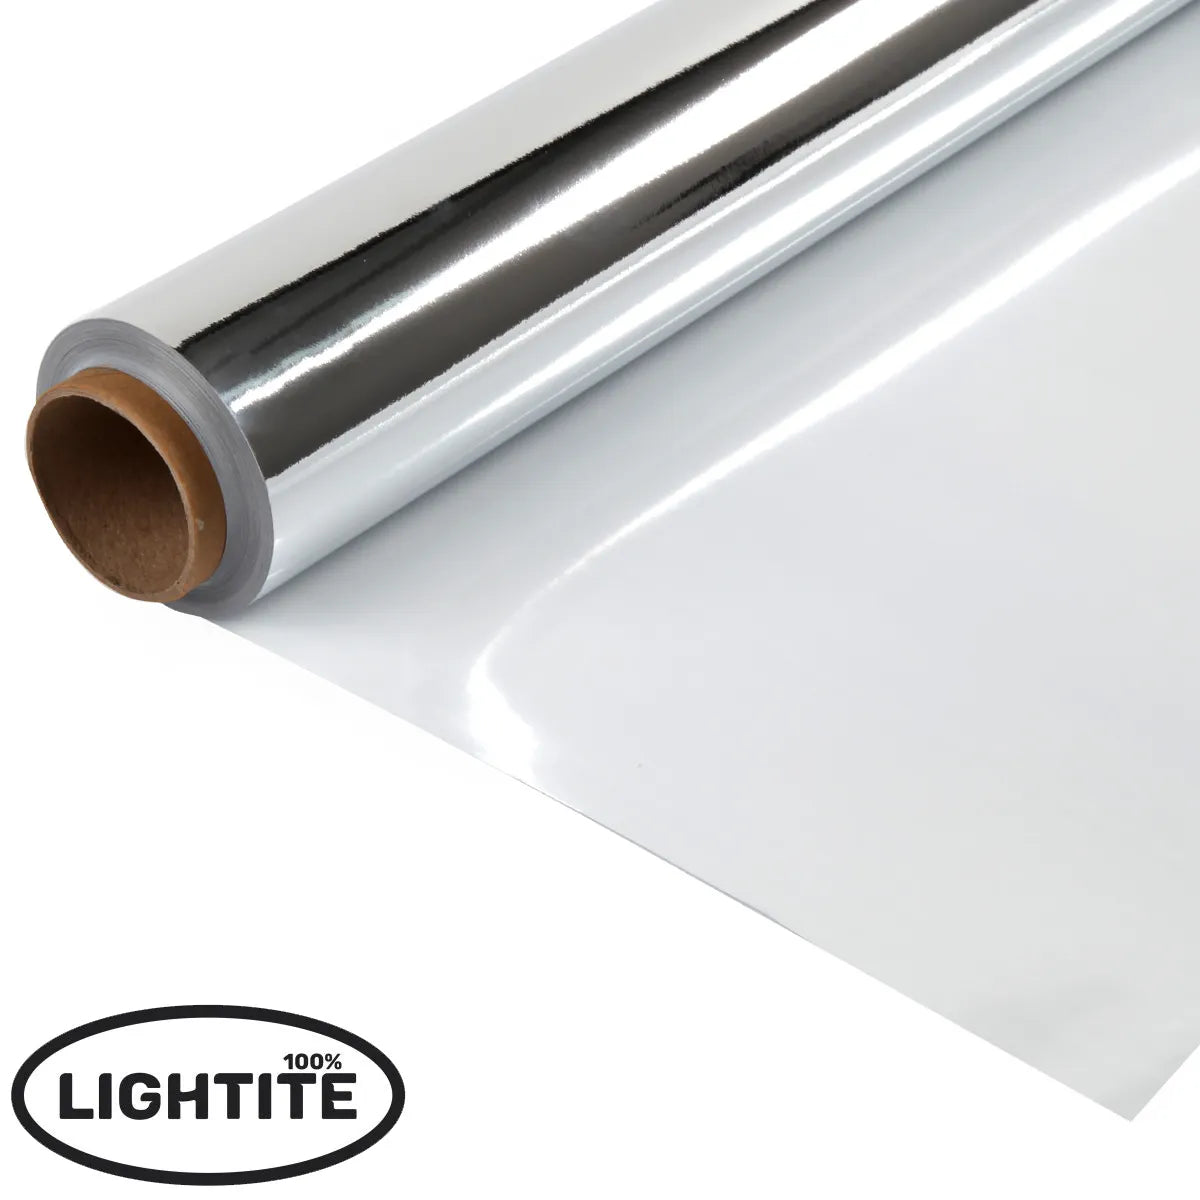 Silver-White Lightite 125mu Sheeting With Thermal Layer